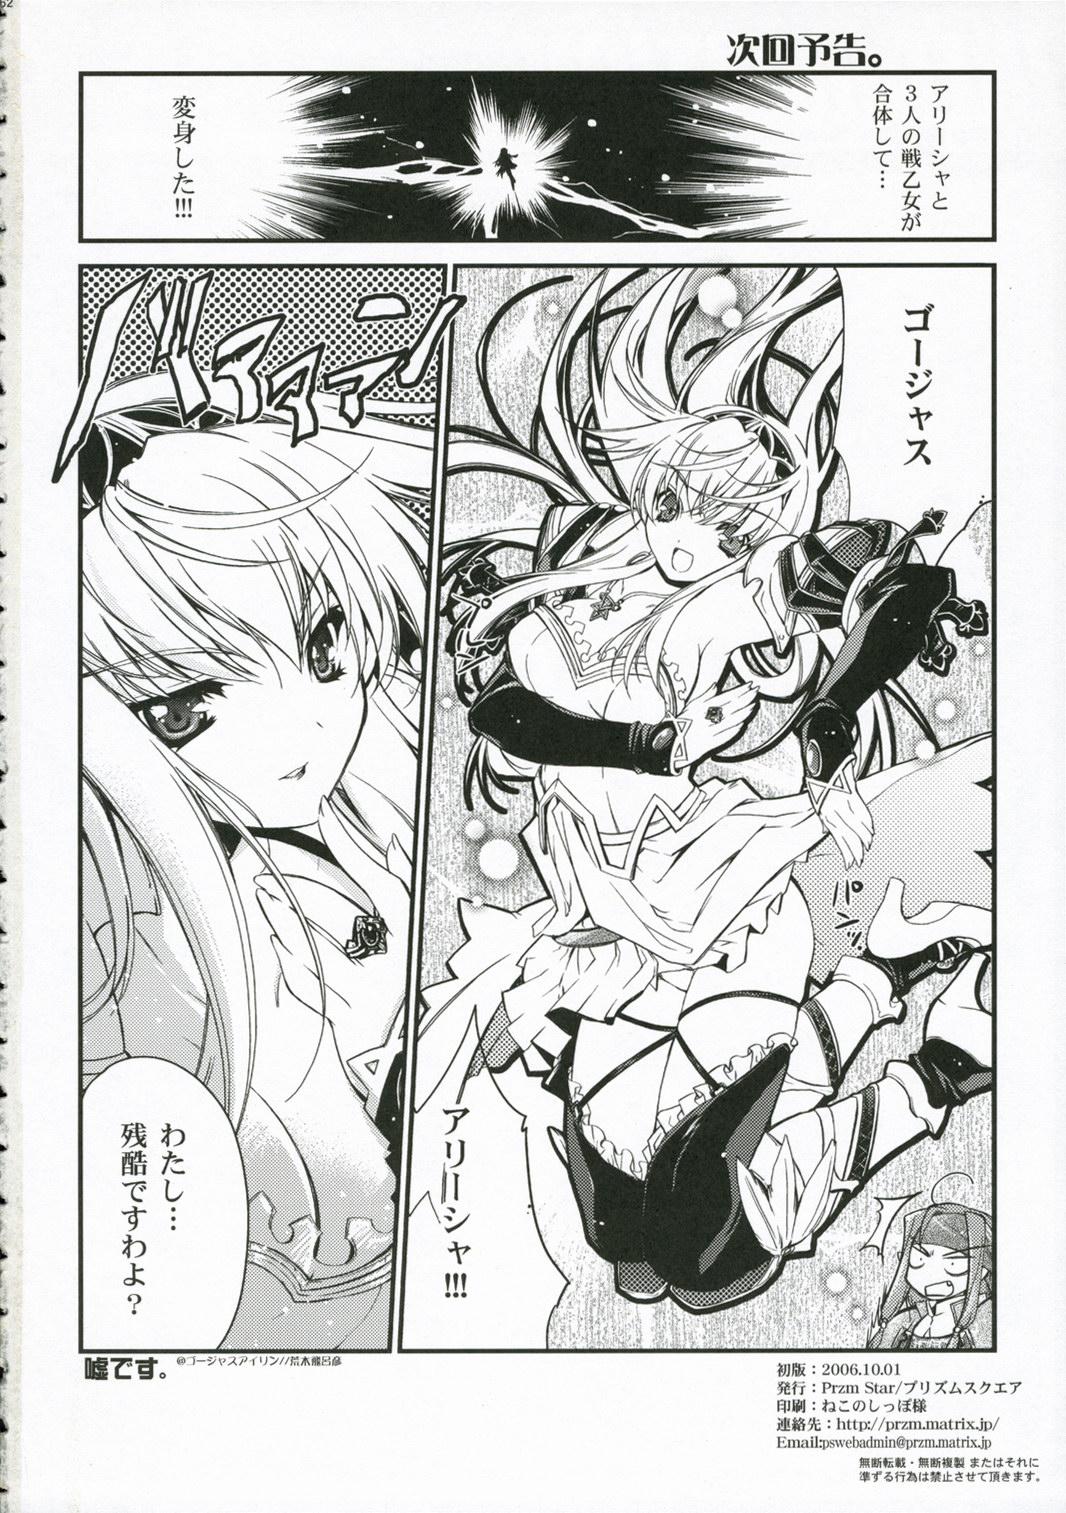 Husband Glamorous Blue - Valkyrie profile Gay Solo - Page 62